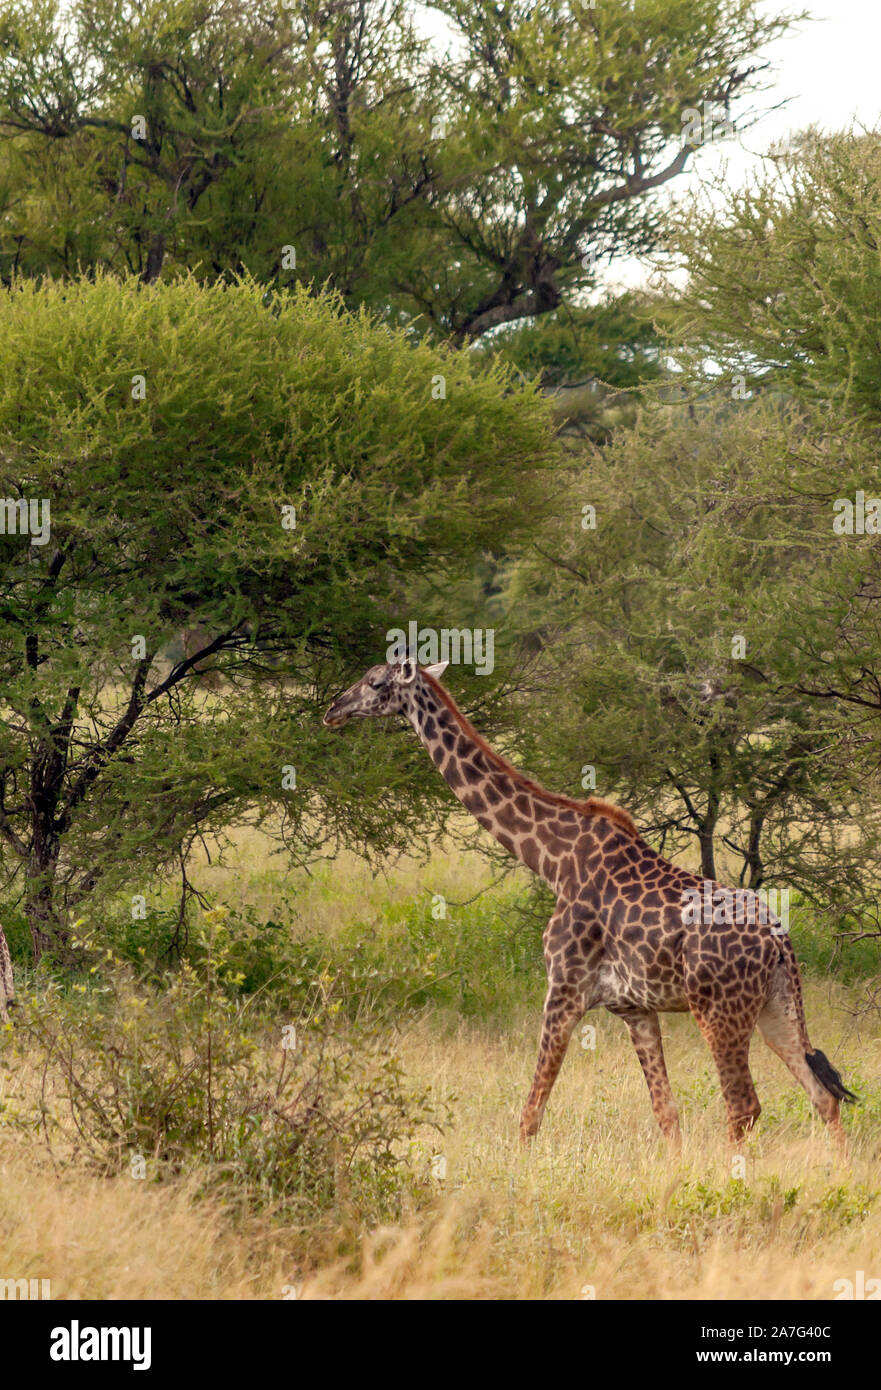 Giraffes in the prairies with acacias from Kenya on a cloudy day Stock Photo